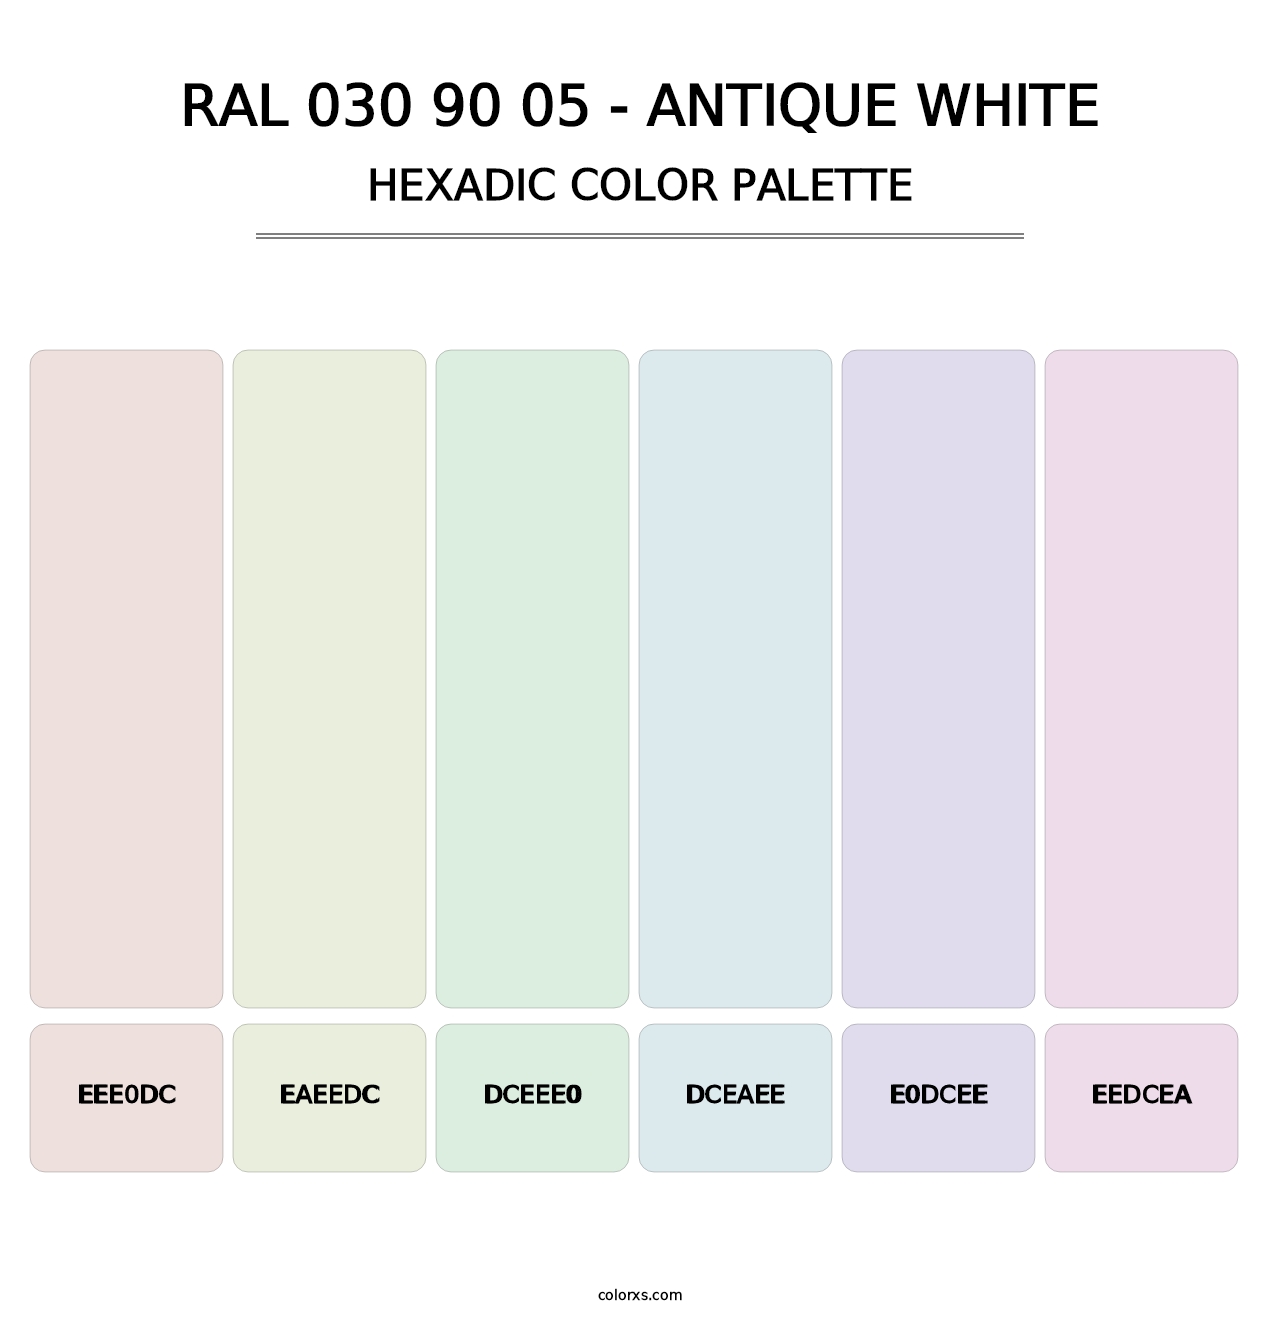 RAL 030 90 05 - Antique White - Hexadic Color Palette